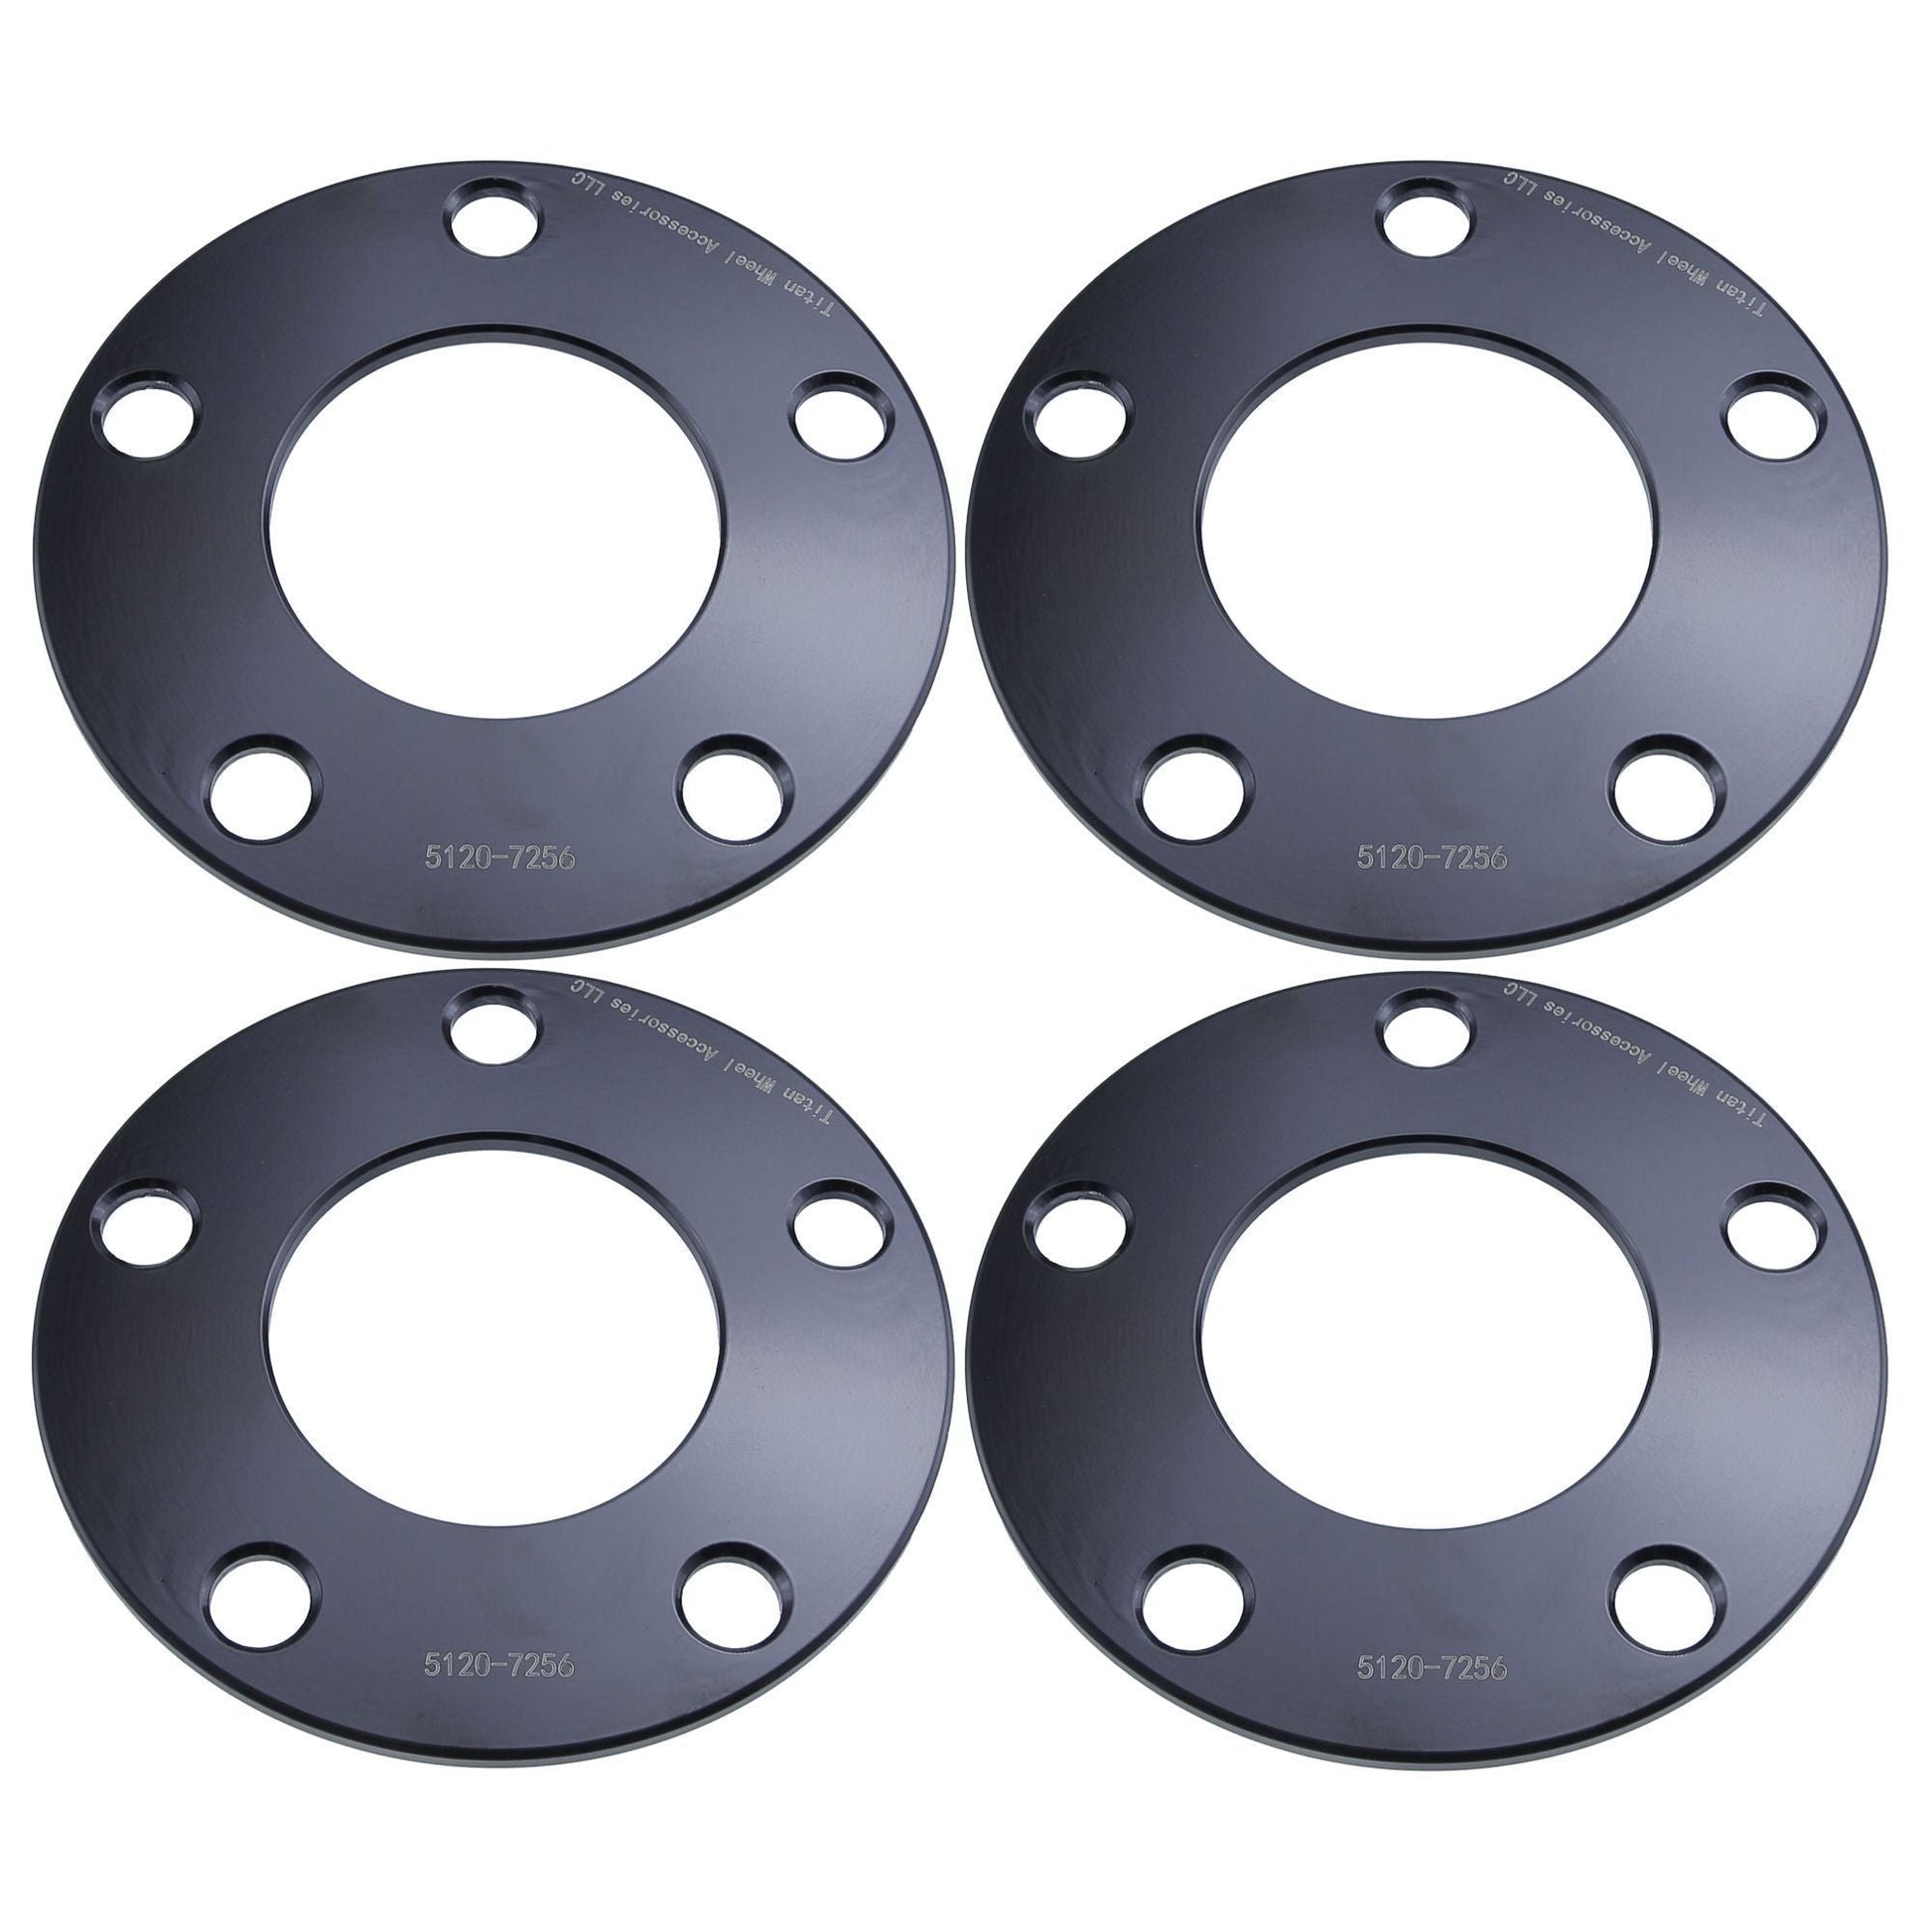 3mm Titan Wheel Spacers for BMW 1 3 5 6 7 Series | 5x120 | 72.56 Hubcentric | Set of 4 | Titan Wheel Accessories